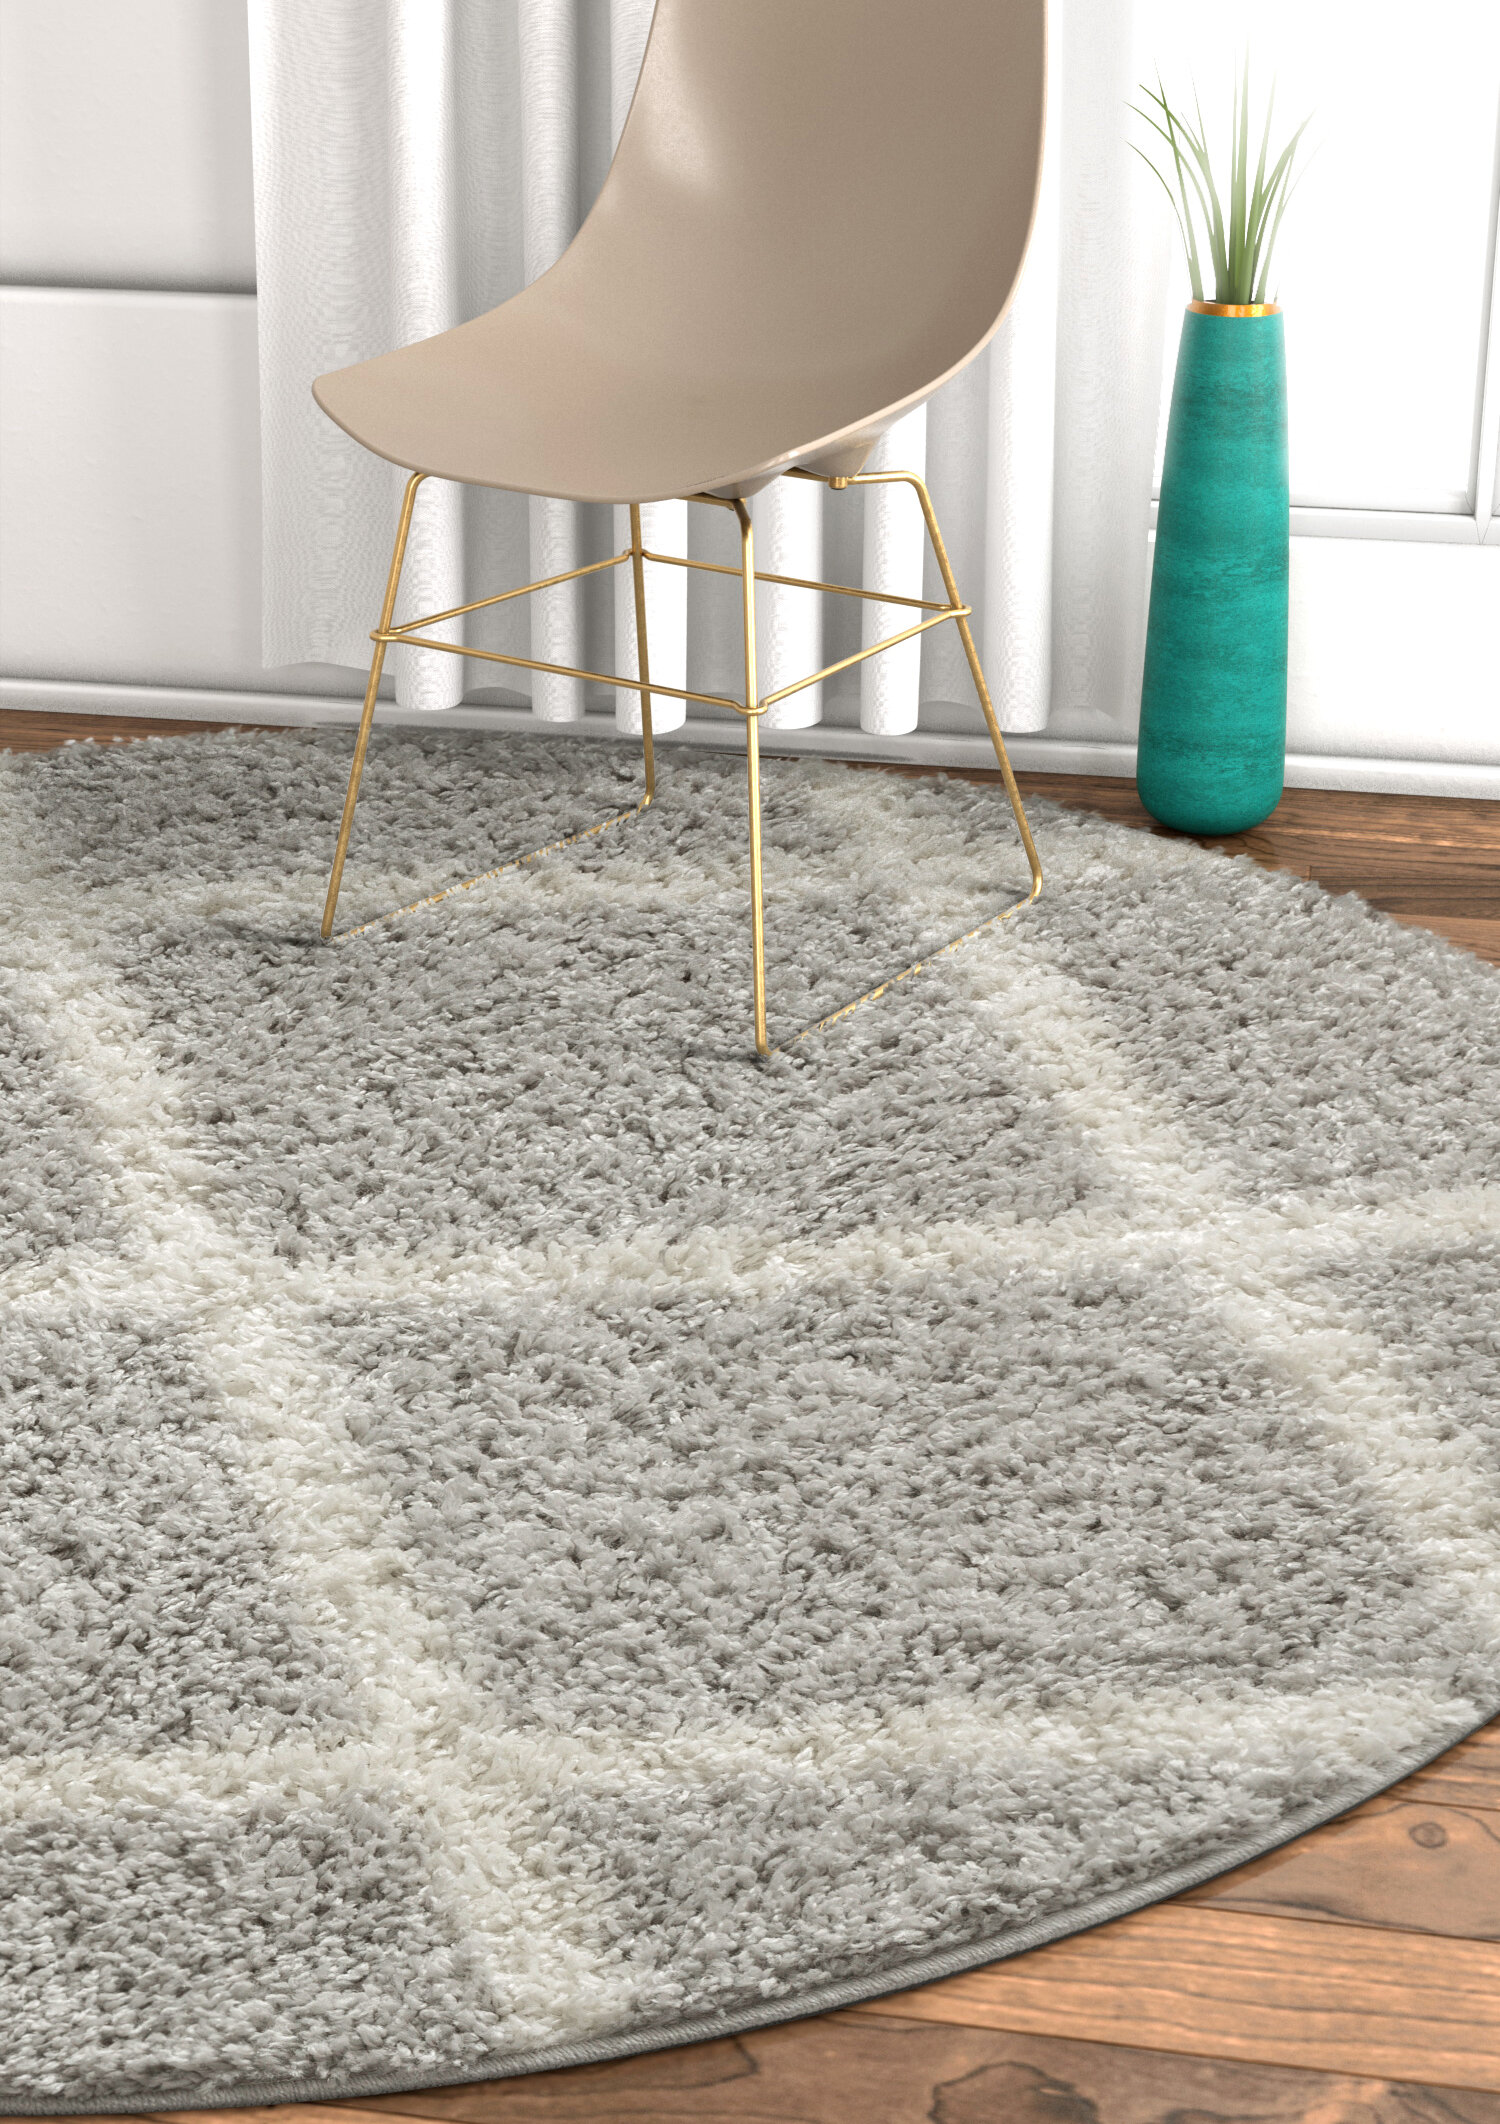 Well Woven Madison Shag Cole Light Grey Area Rug Reviews